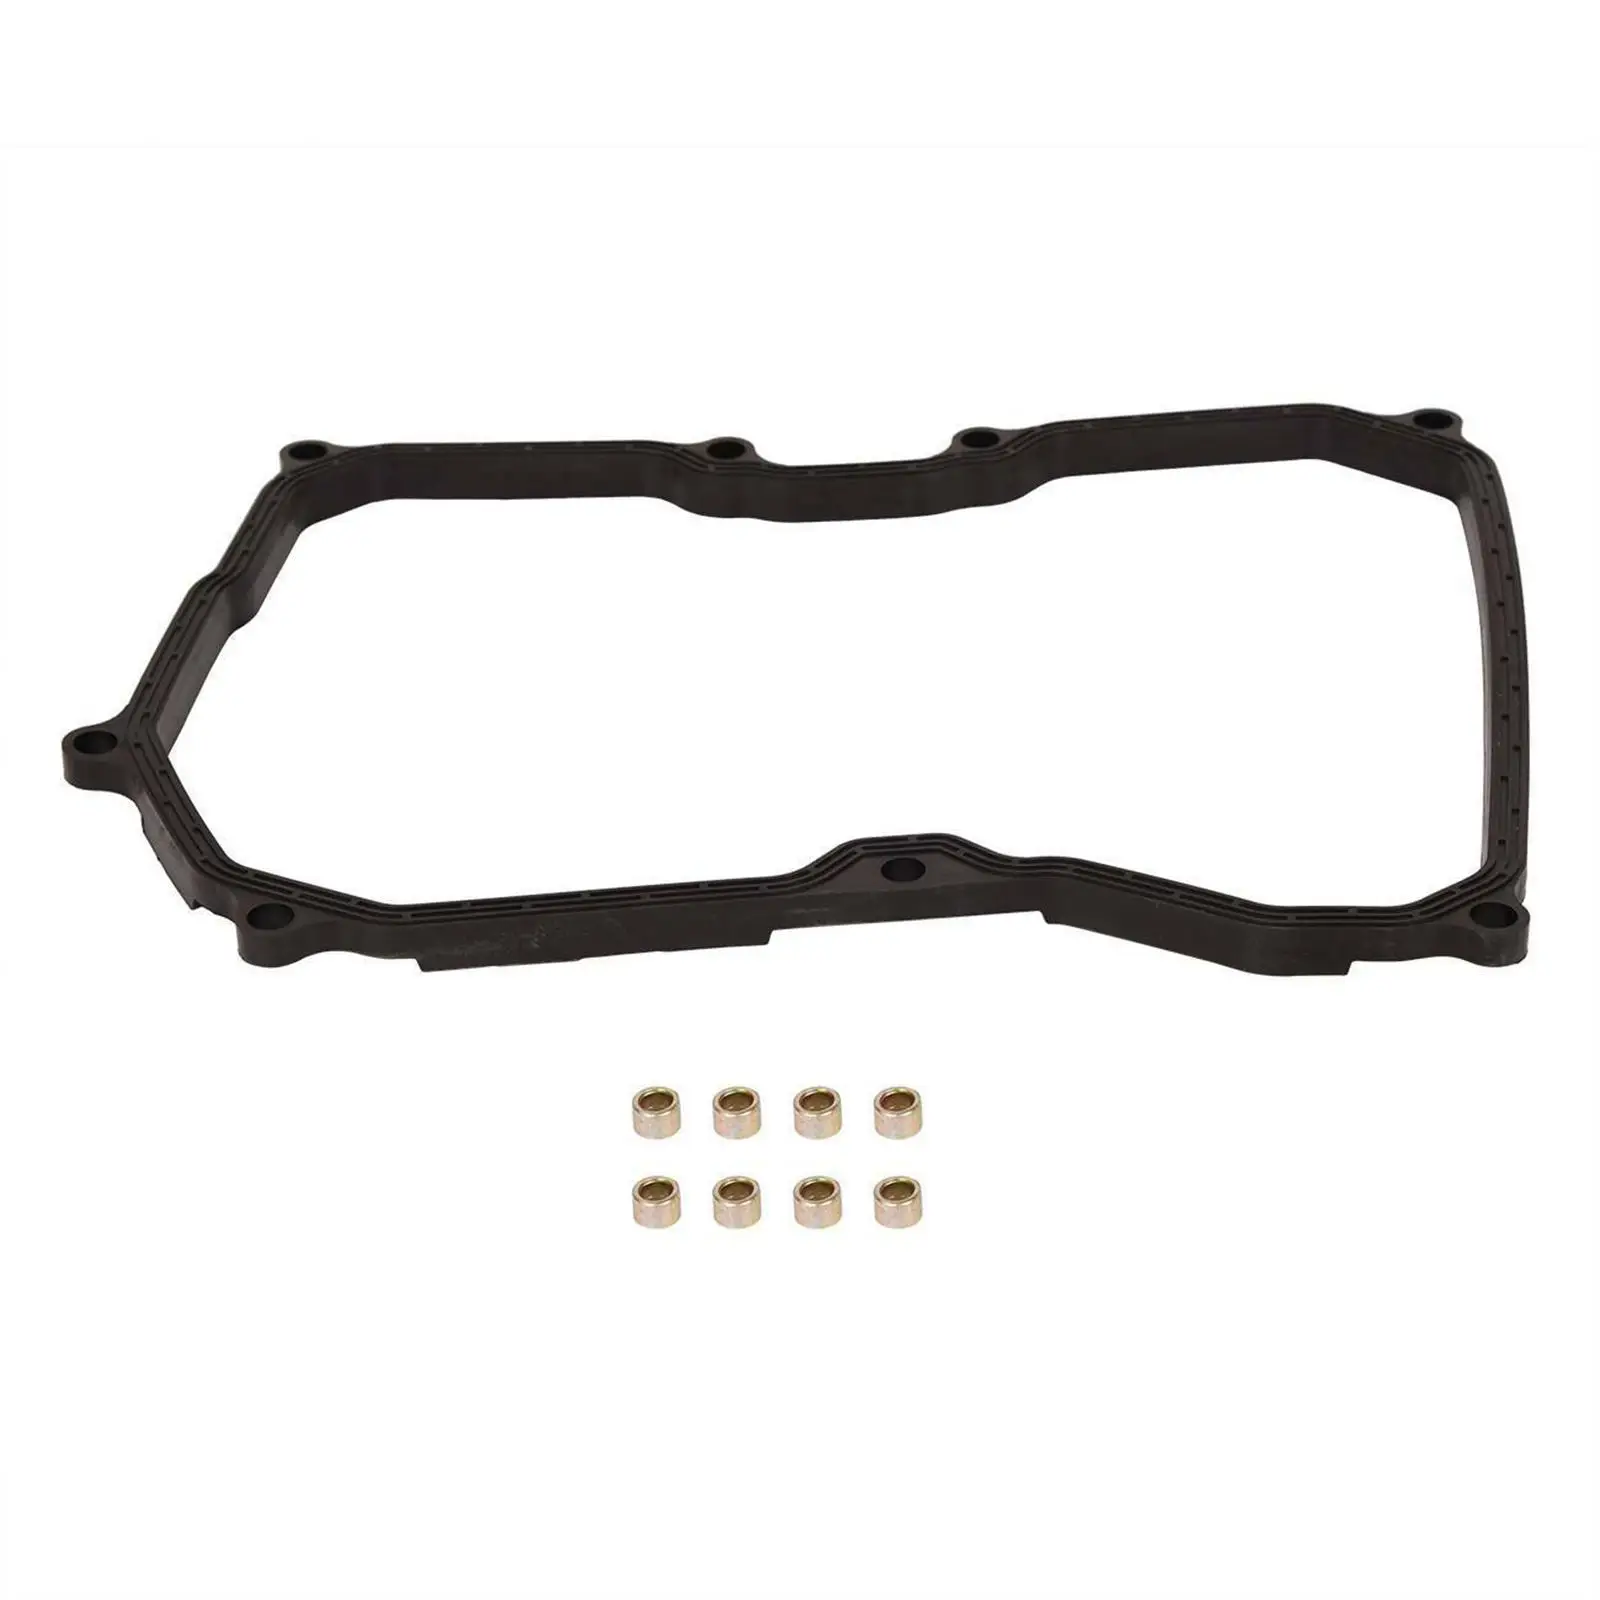 Transmission Pan Gasket Durable Lightweight 24117566356 for Mini Spare Parts Replace Easy to Install Accessories